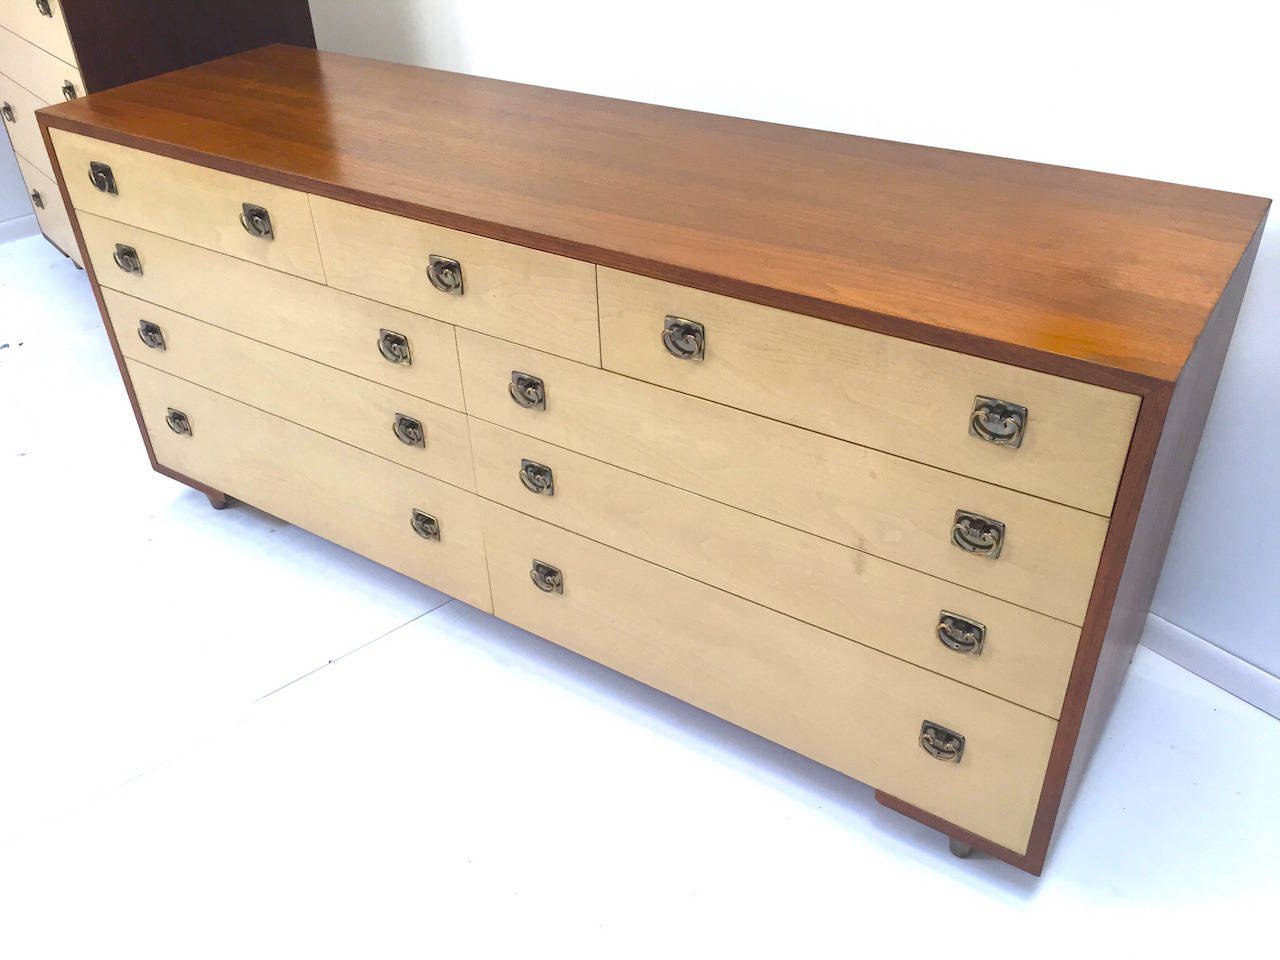 Paul Frankl Dresser Chest of Drawers for Johnson Furniture Company.  Good original condition with some minor wear from use.  Some dings on the top surface as shown.  Sold in as found condition for use as-is or for restoration.  Matching Hi-Boy and